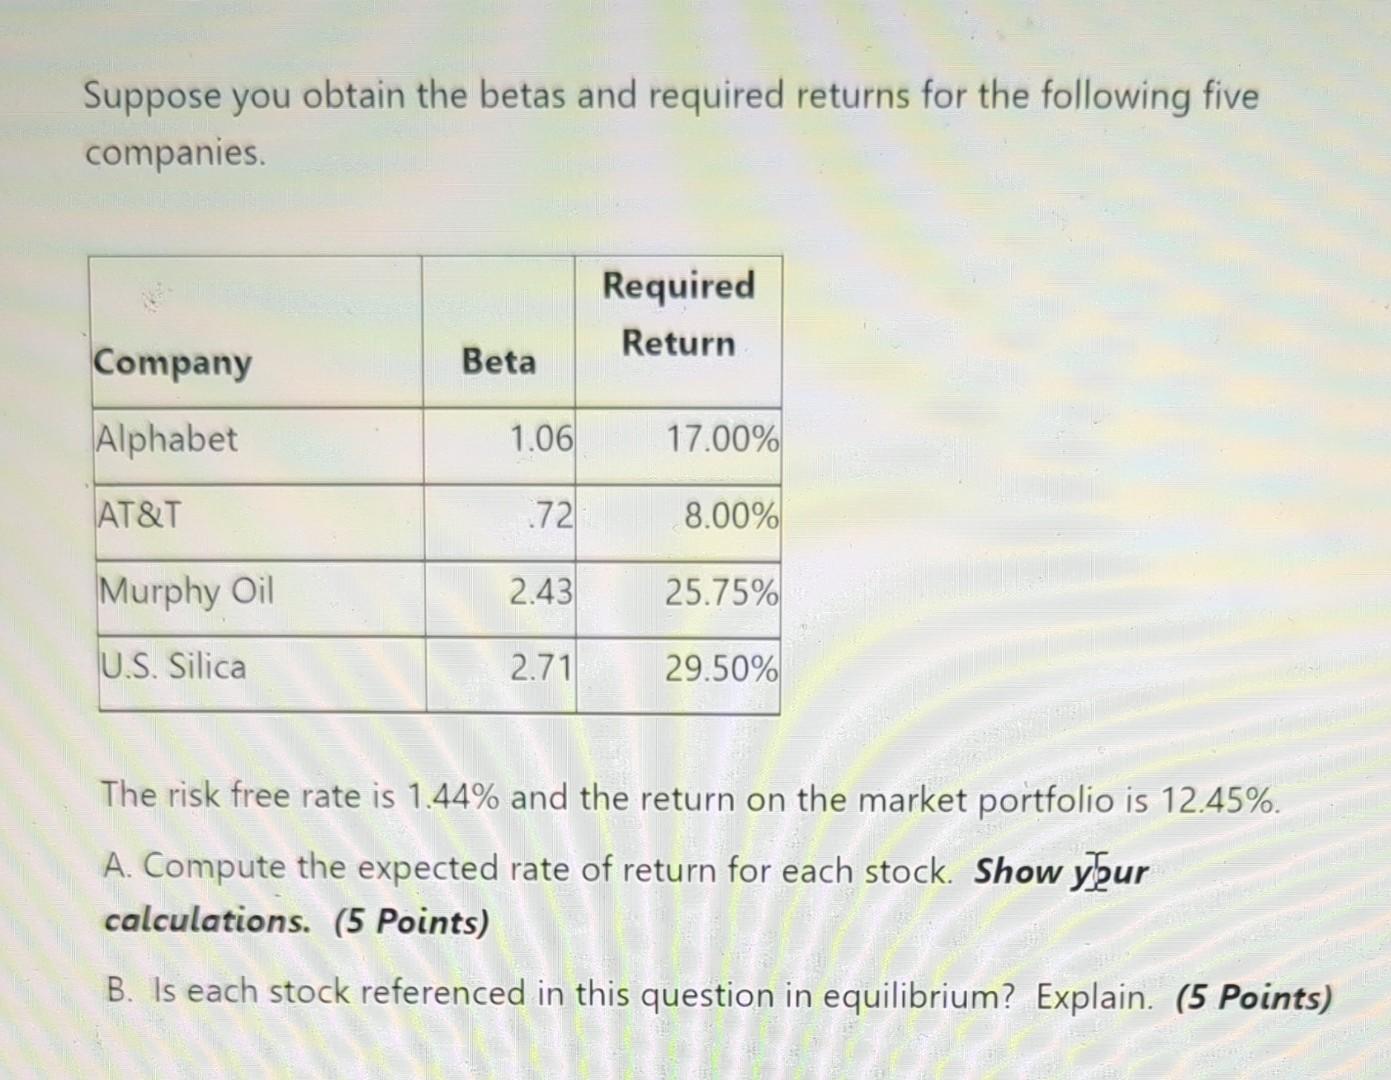 Suppose you obtain the betas and required returns for the following five companies. Company Alphabet AT&T